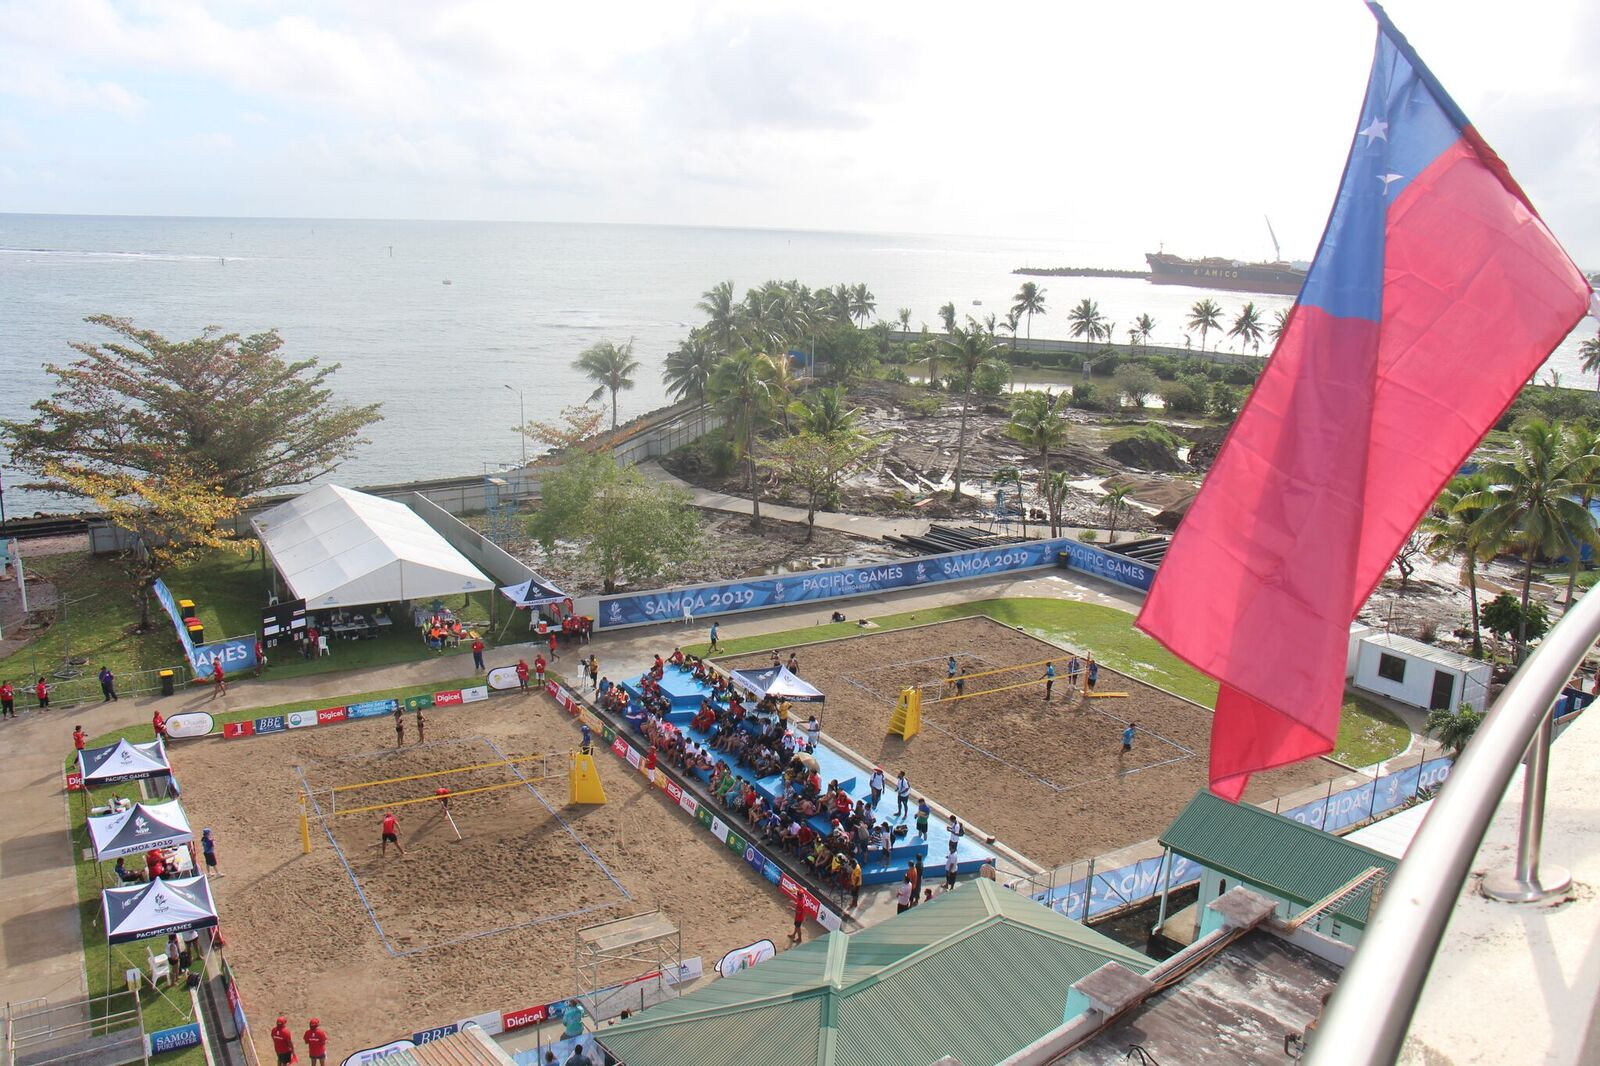 Samoa 2019: Day two of competition